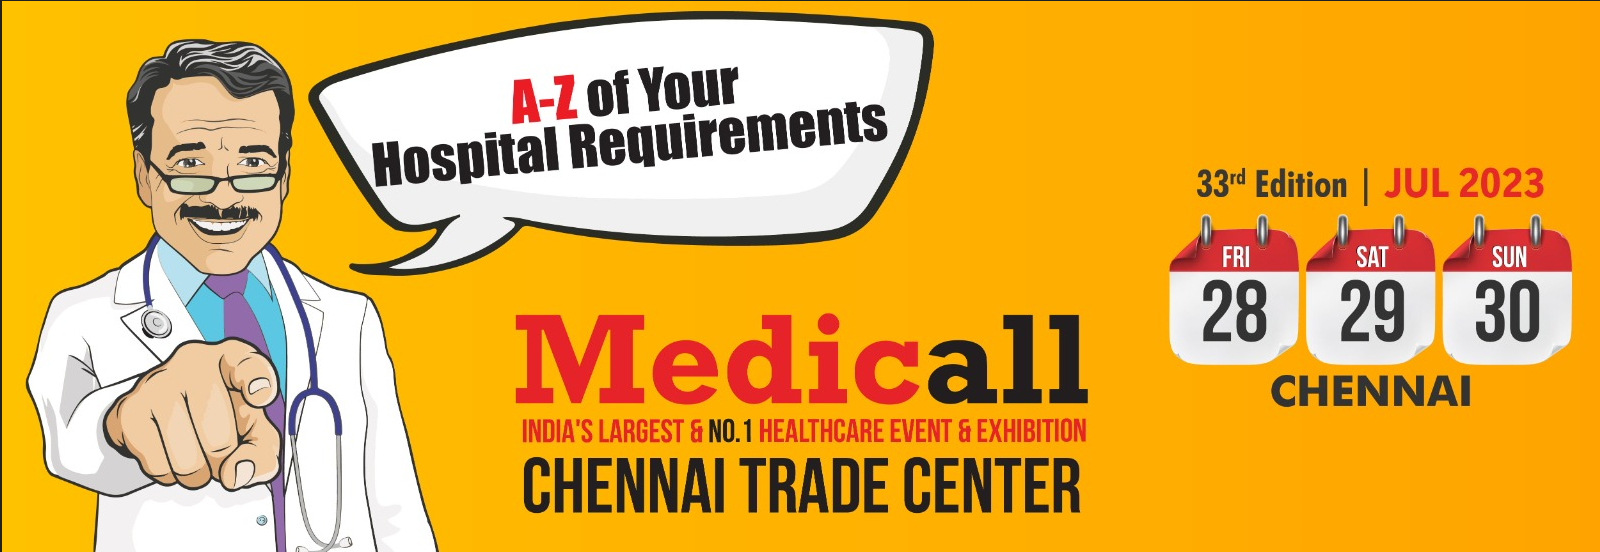 Medicall - India's Largest Hospital Equipment Expo - 33rd Edition, Online Event